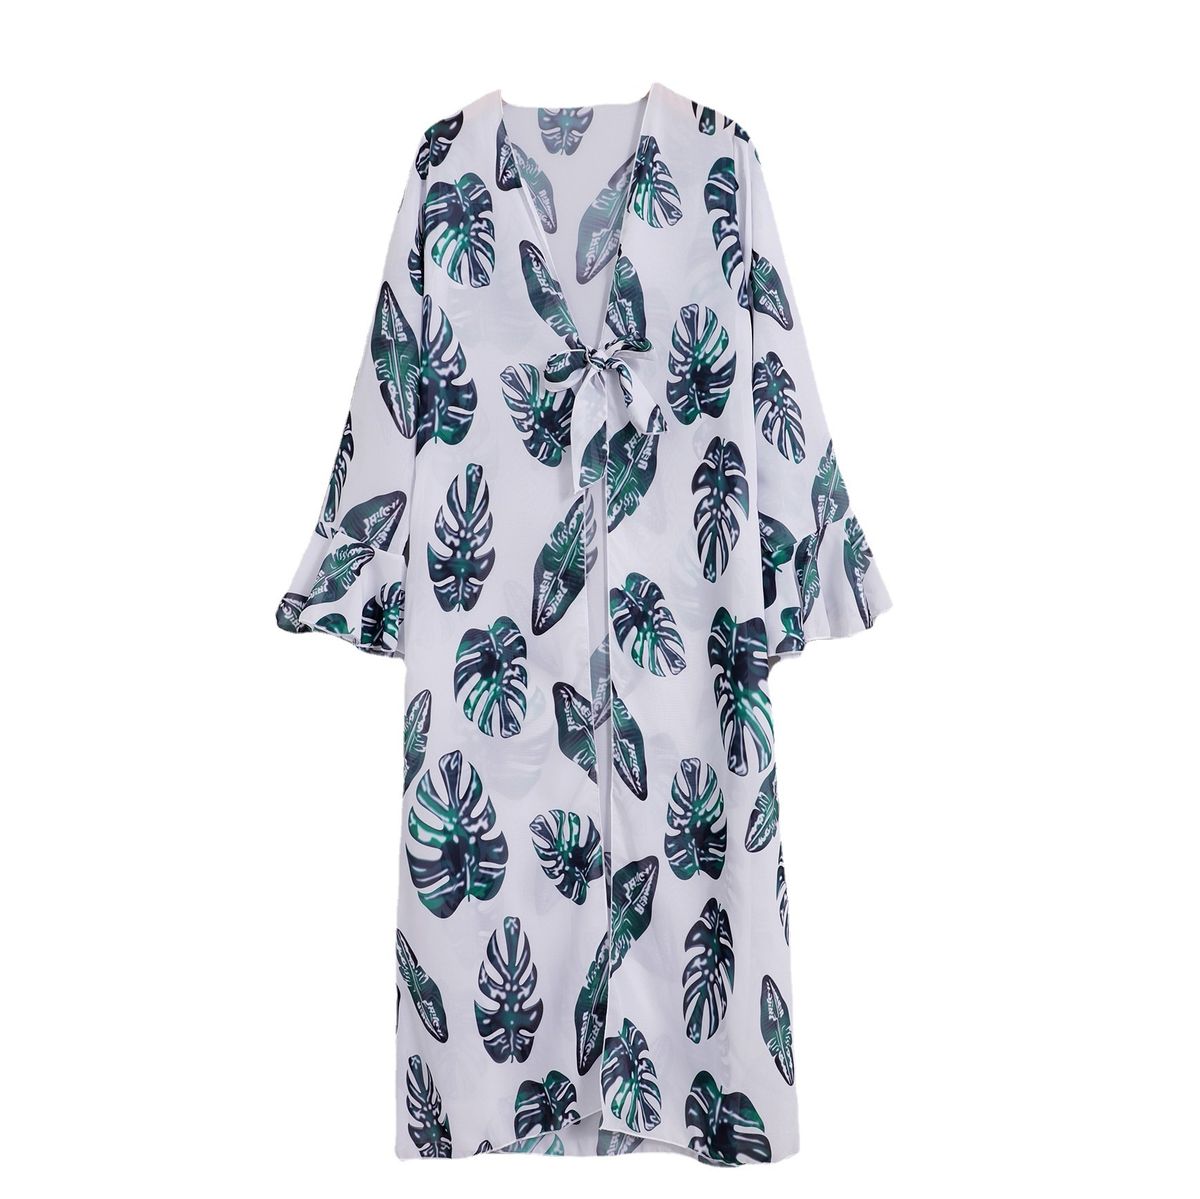 Olive Tree - Beach Swimsuit Cover Up Long Skirt - White Leaf | Shop ...